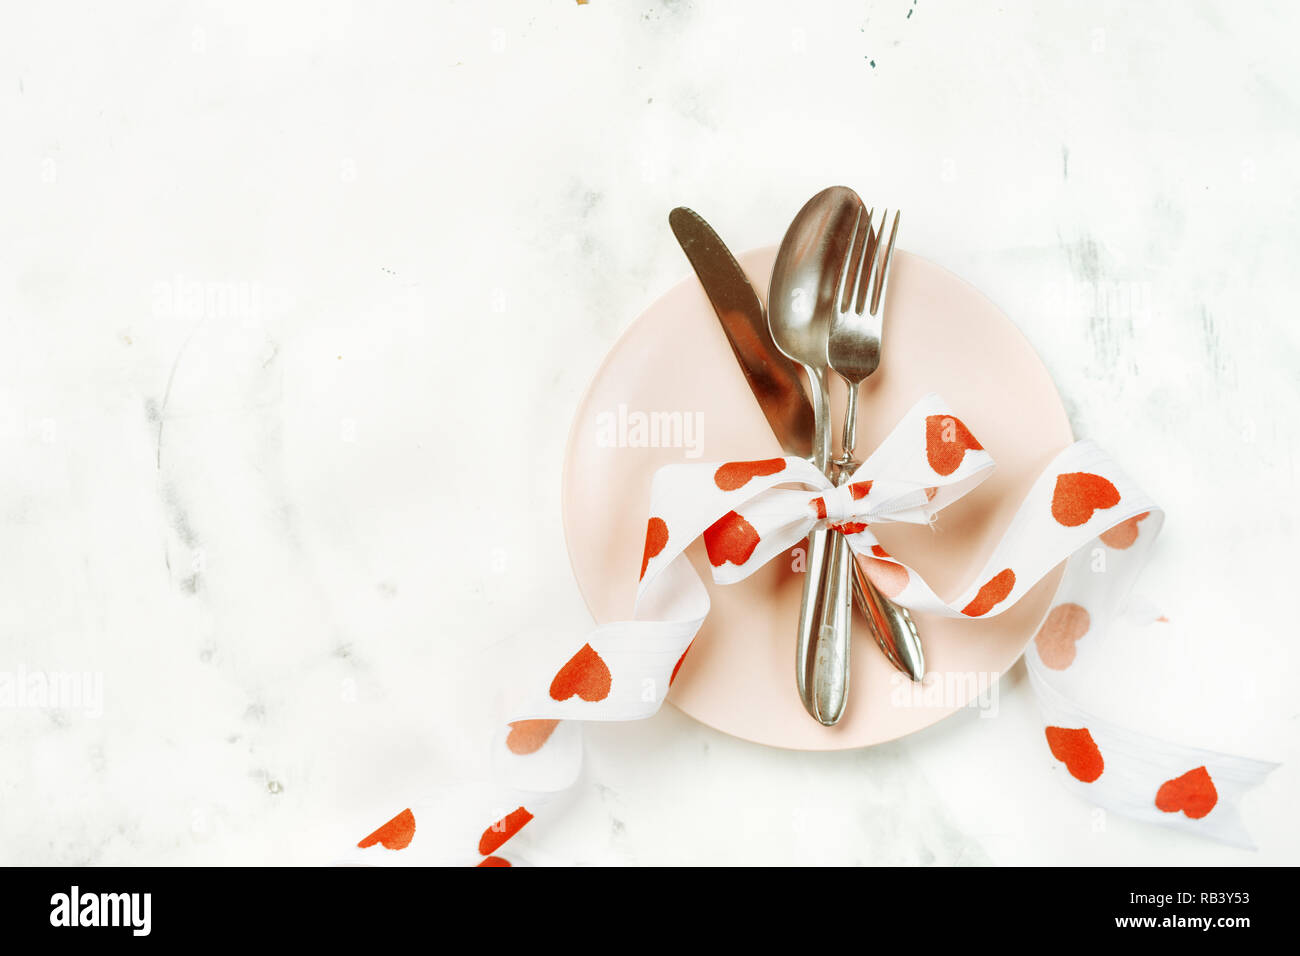 Festive table setting with cutlery and pink plate for Valentines Day Stock Photo